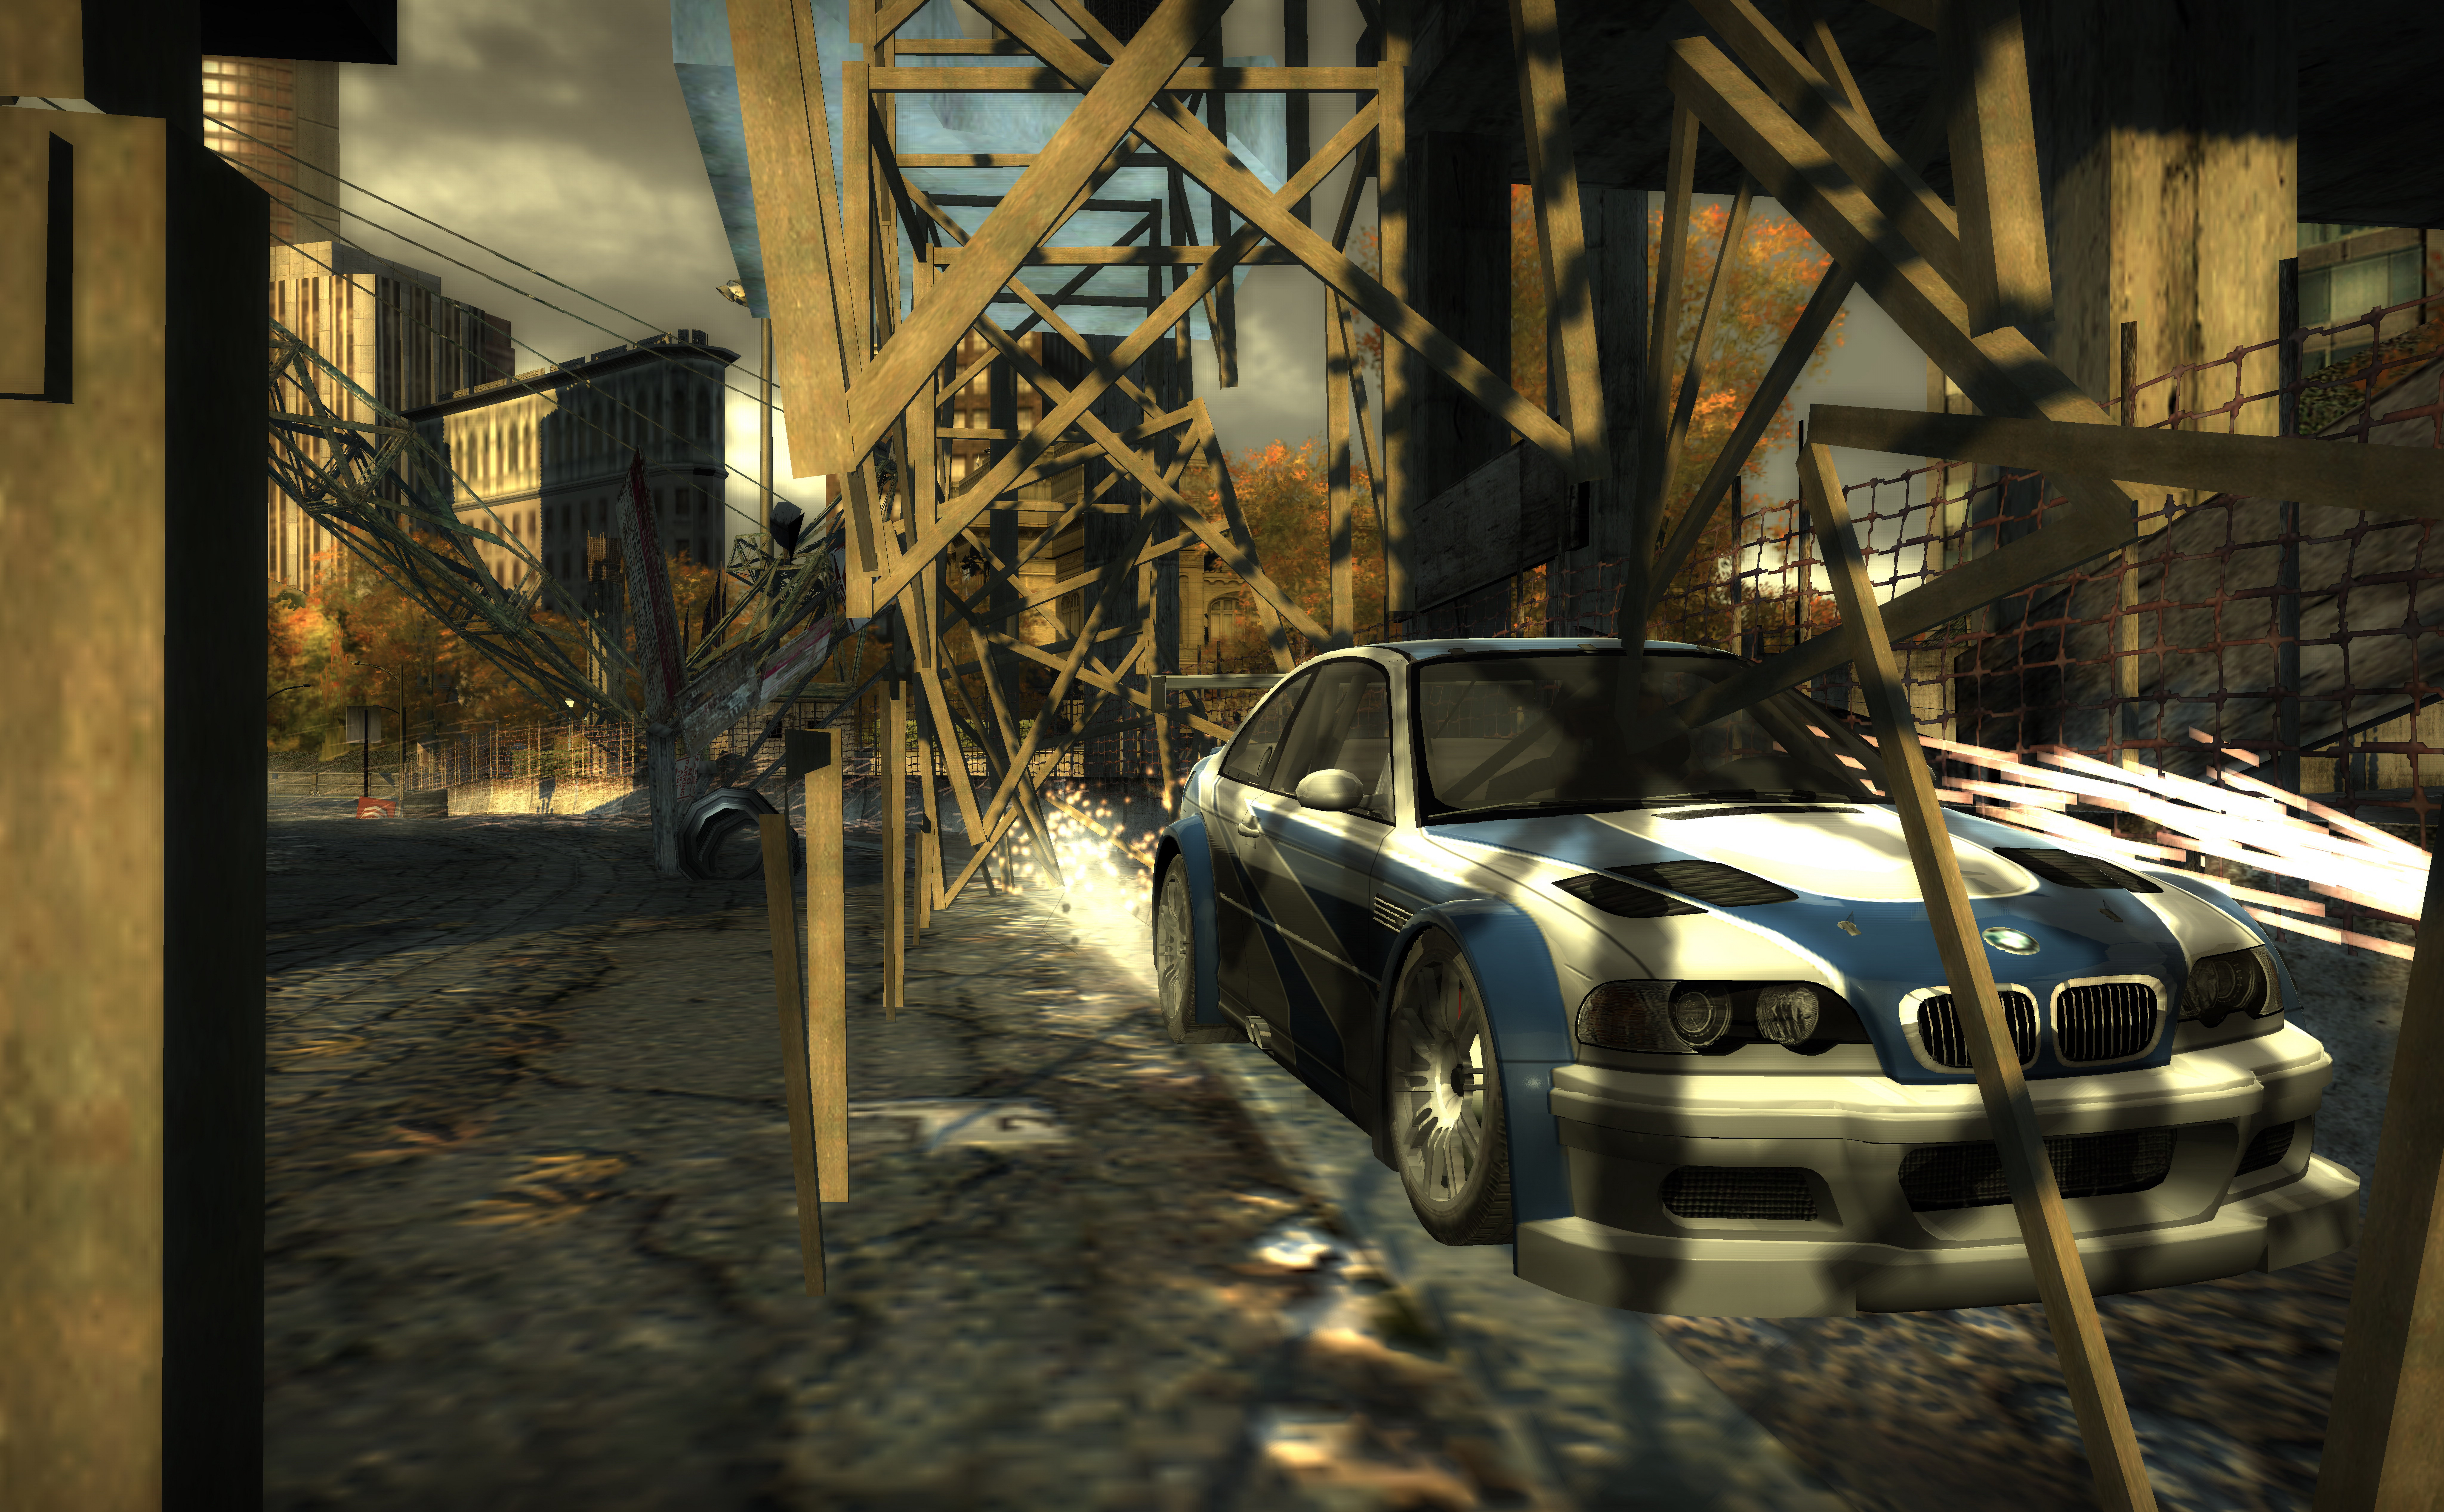 Nfs mw cars. NFS most wanted 2005. NFS MW 2005 погоня. Недфорспид most wanted 2005. Need for Speed мост вантед.